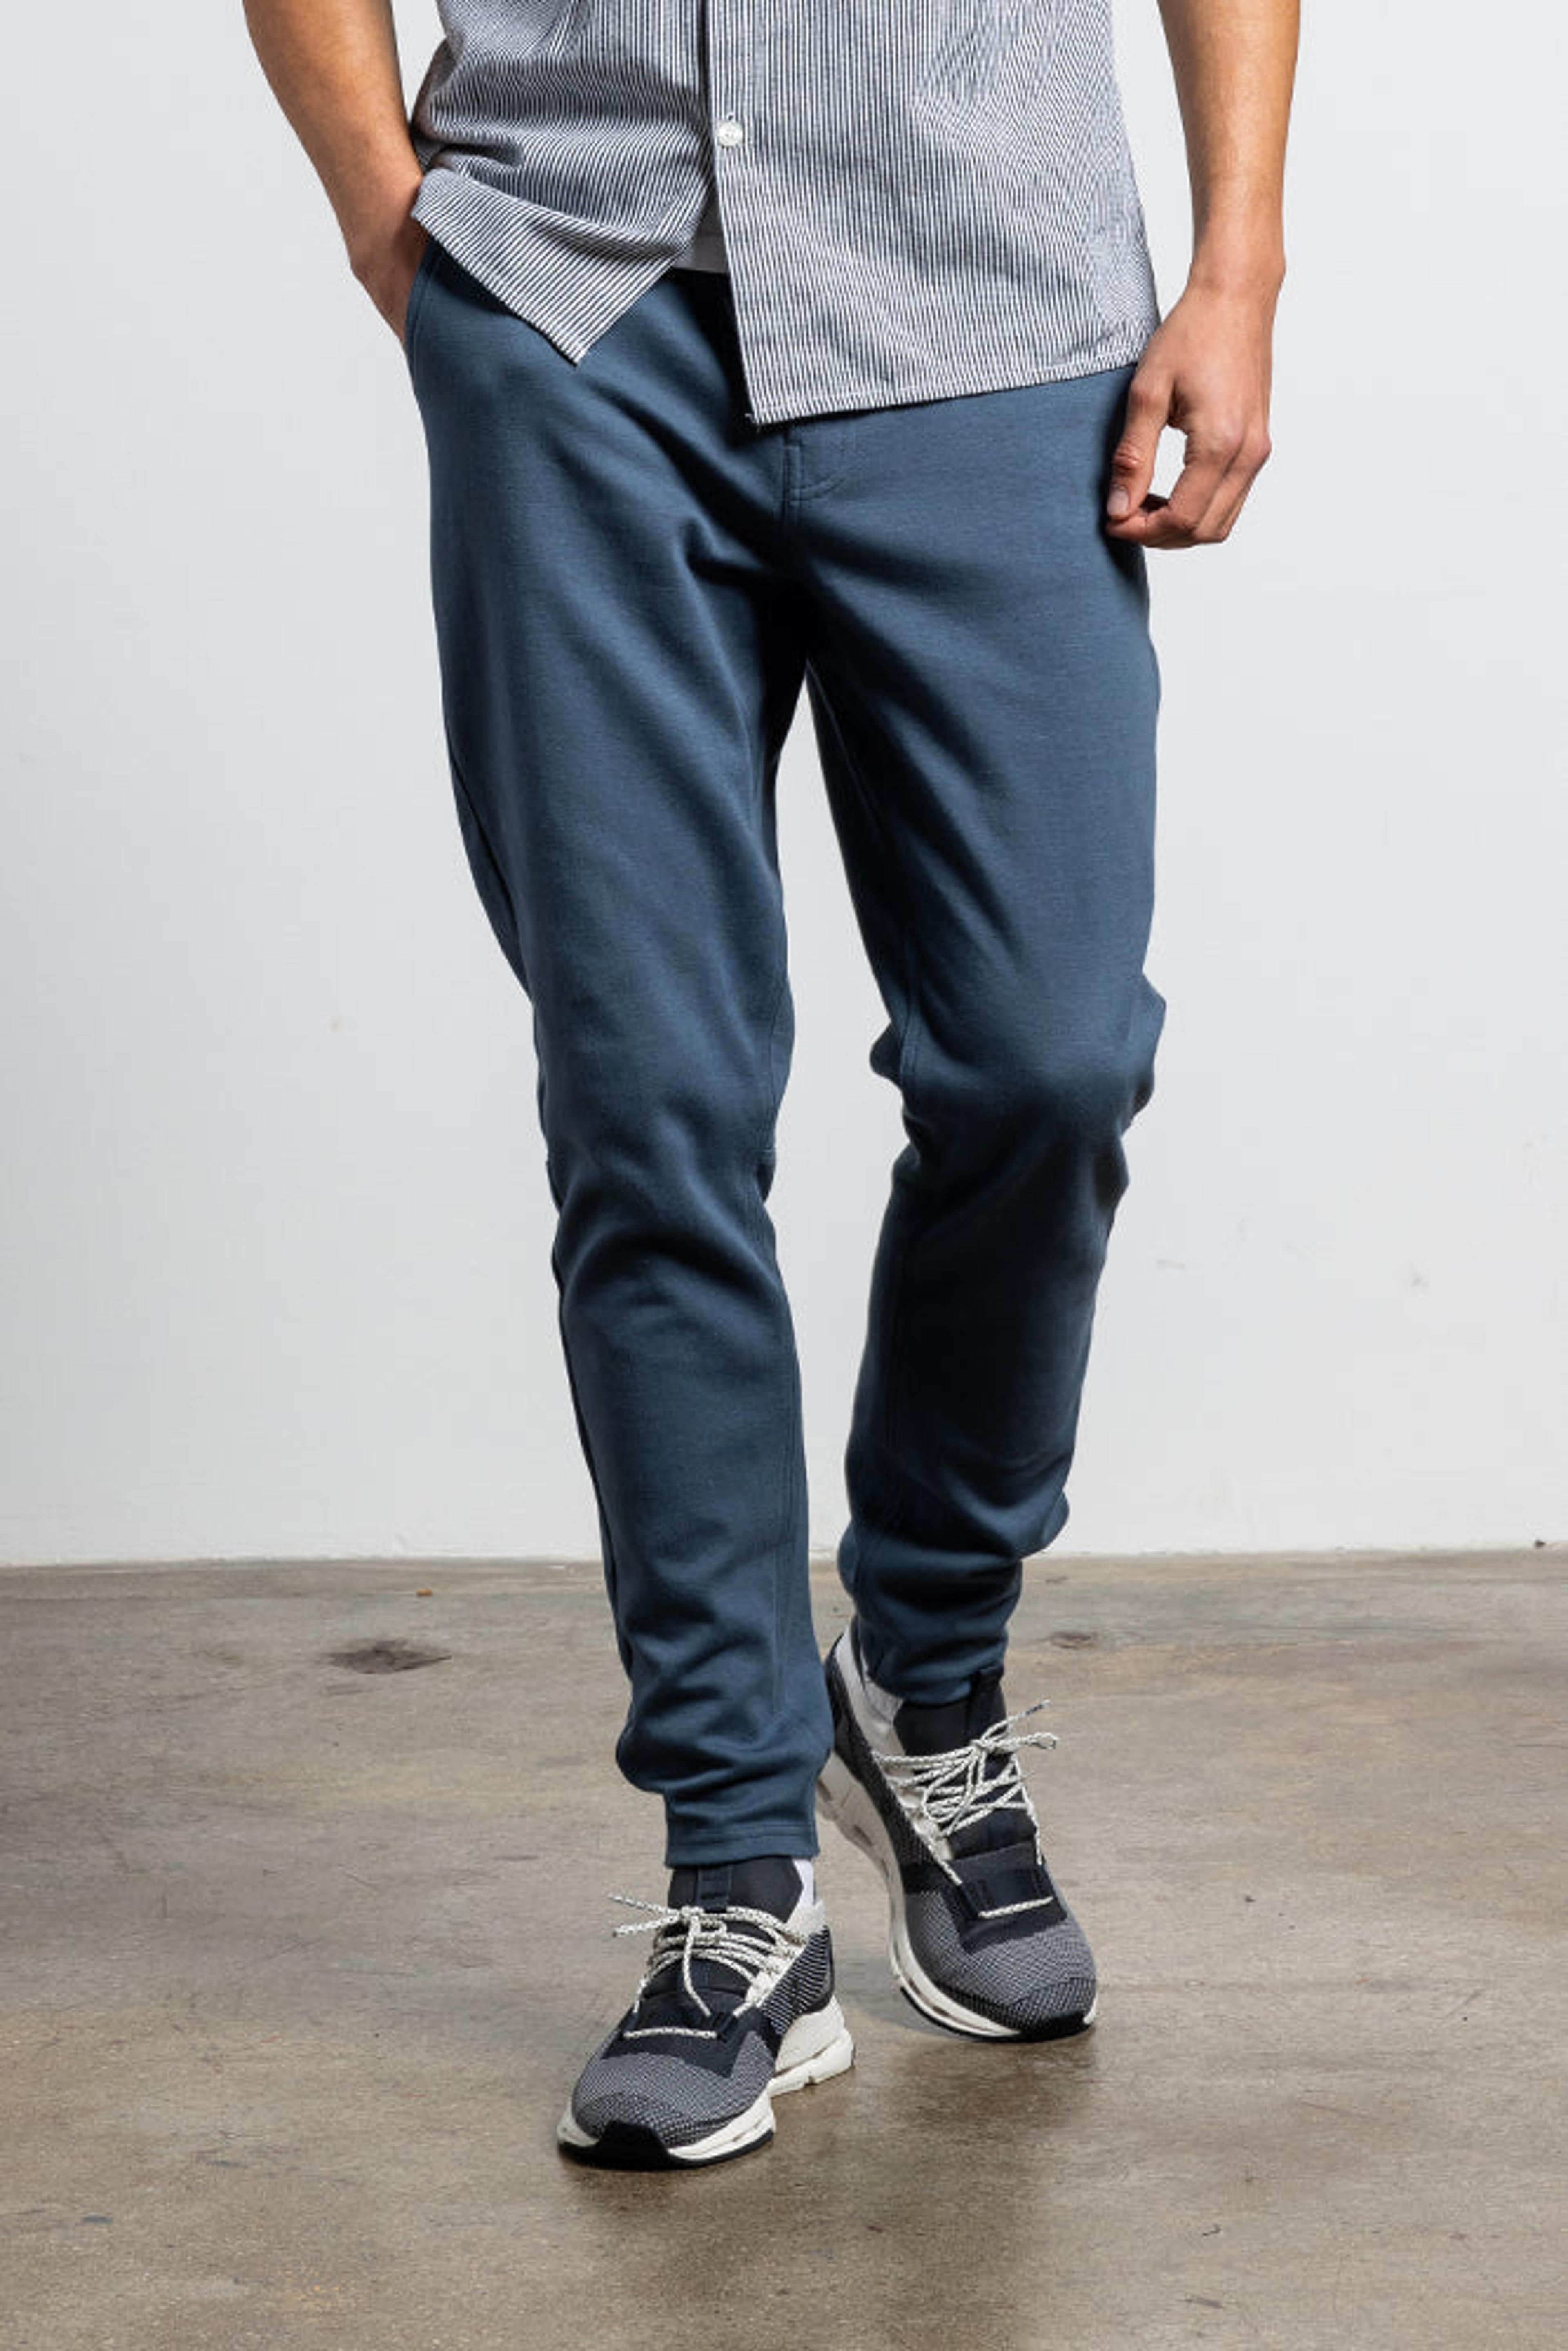 Alternate View 36 of 686 Men's Everywhere Double Knit Pant